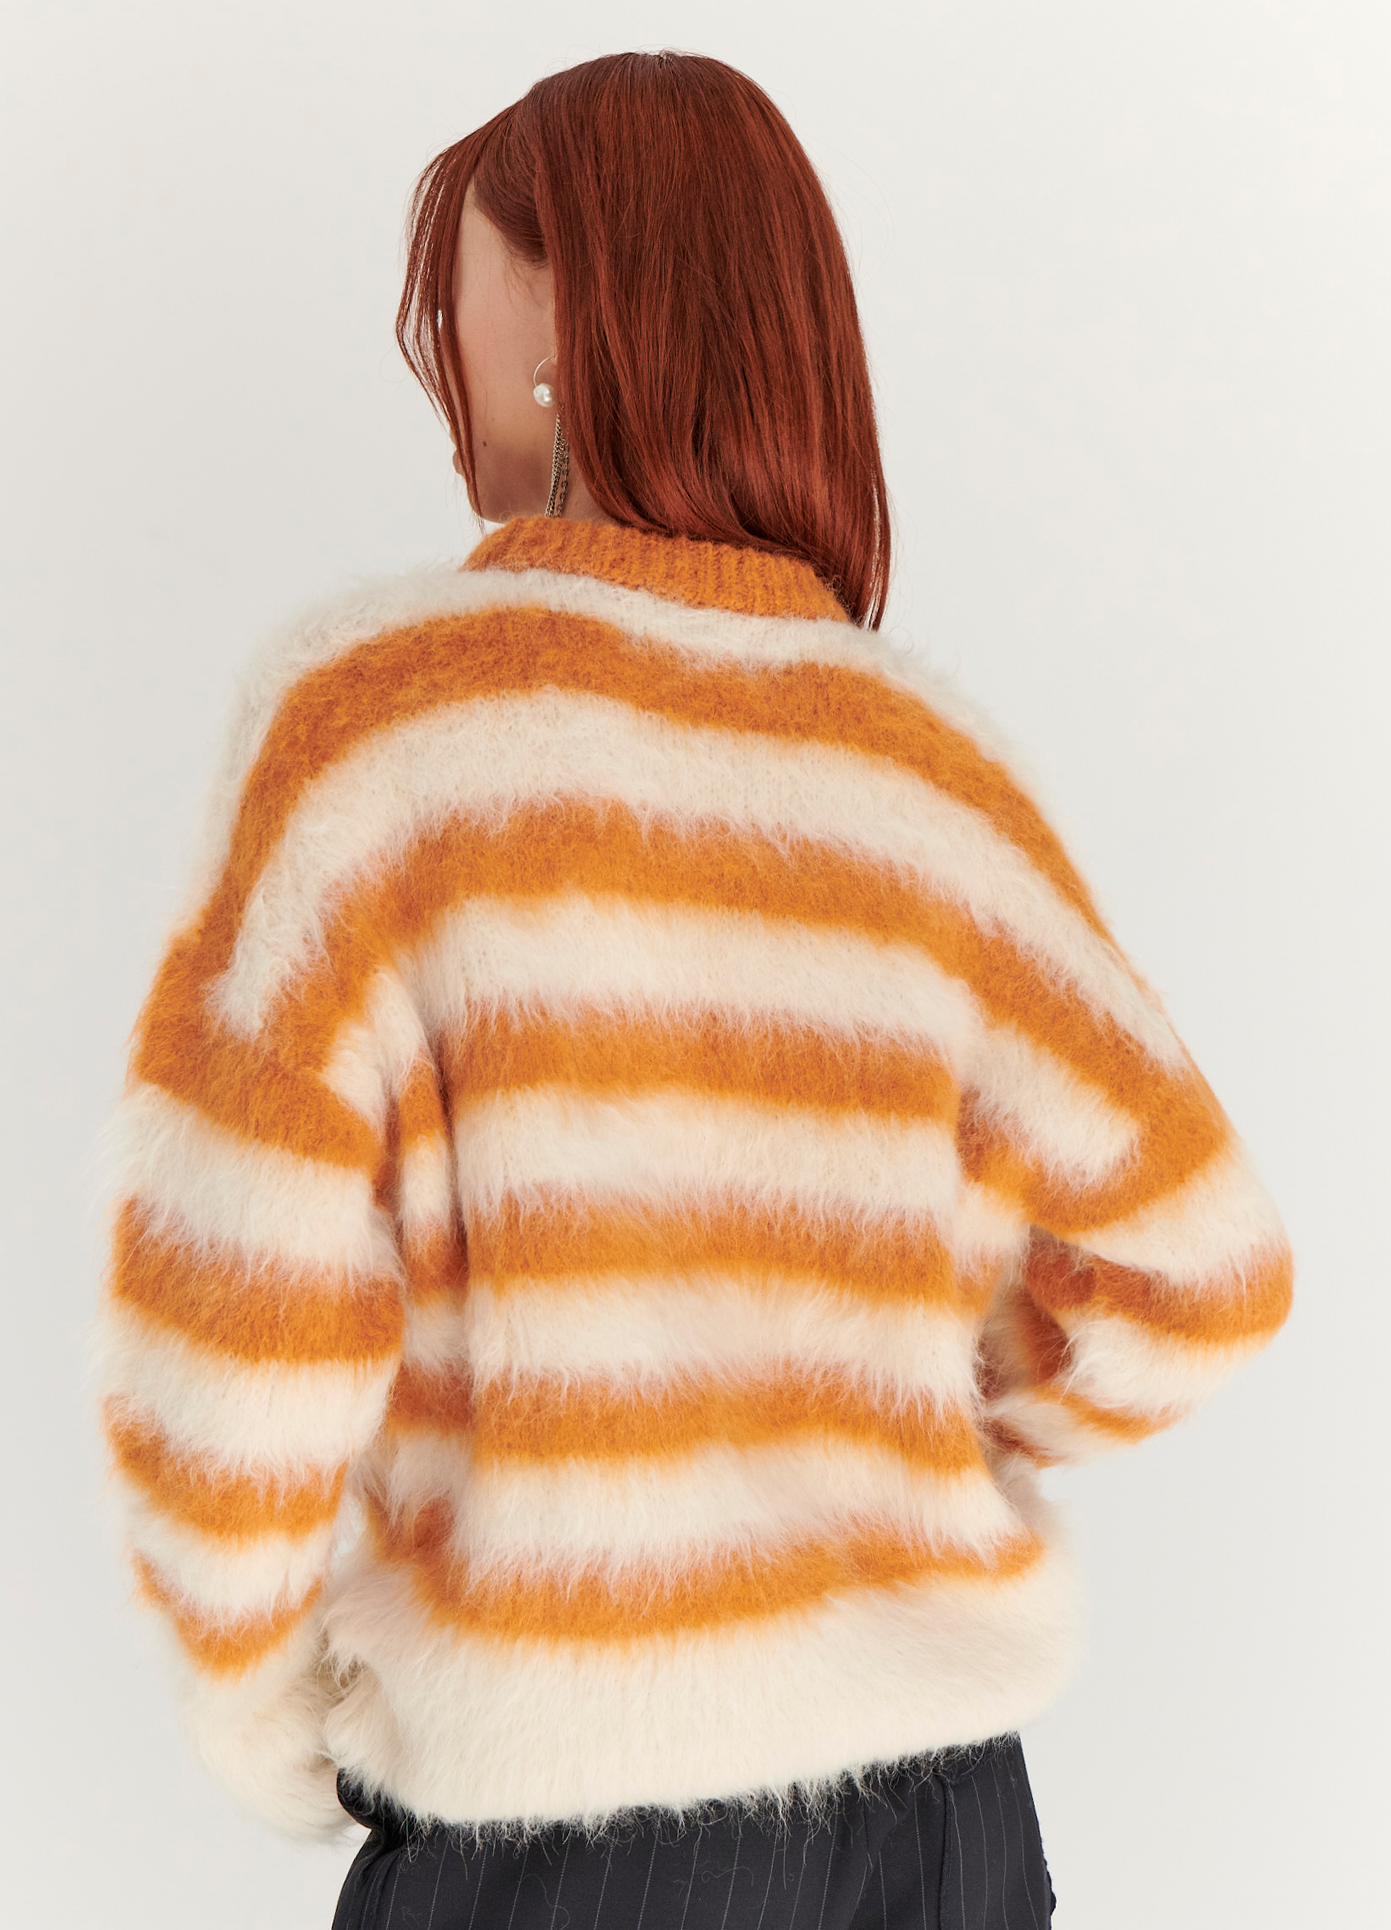 MONSE Striped Alpaca Sweater in White and Orange on model back detail view